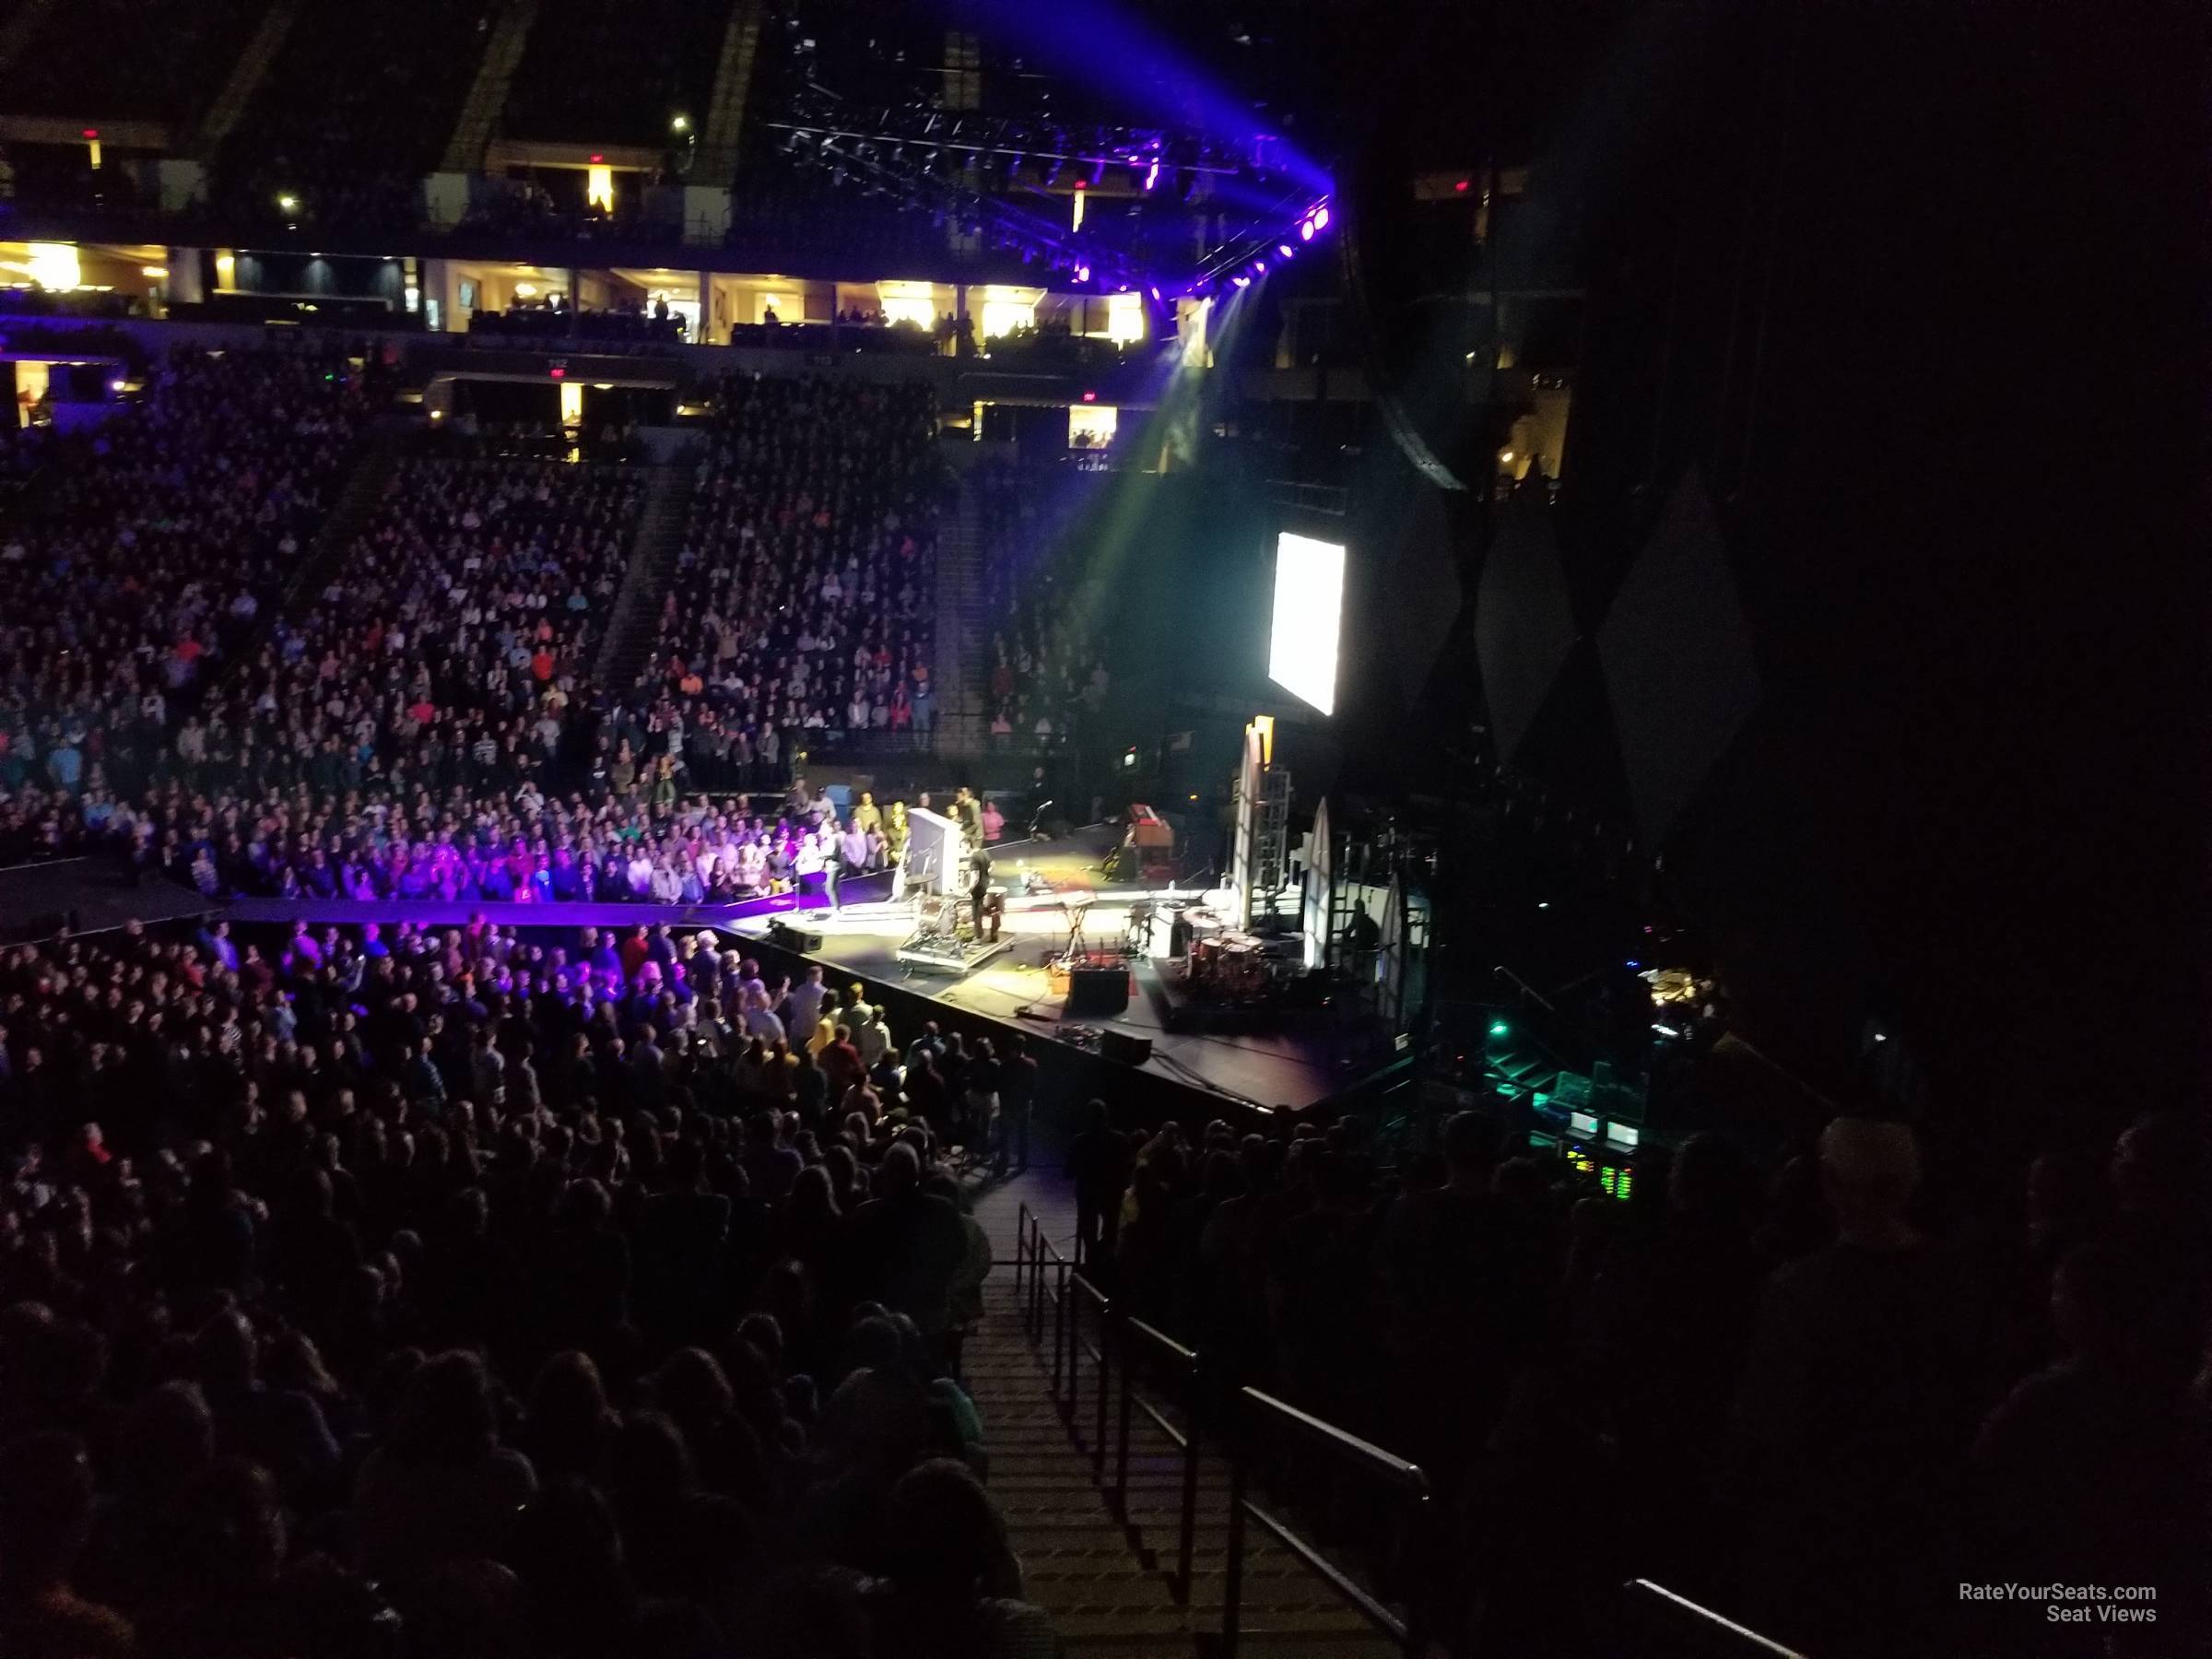 section 129, row u seat view  for concert - target center